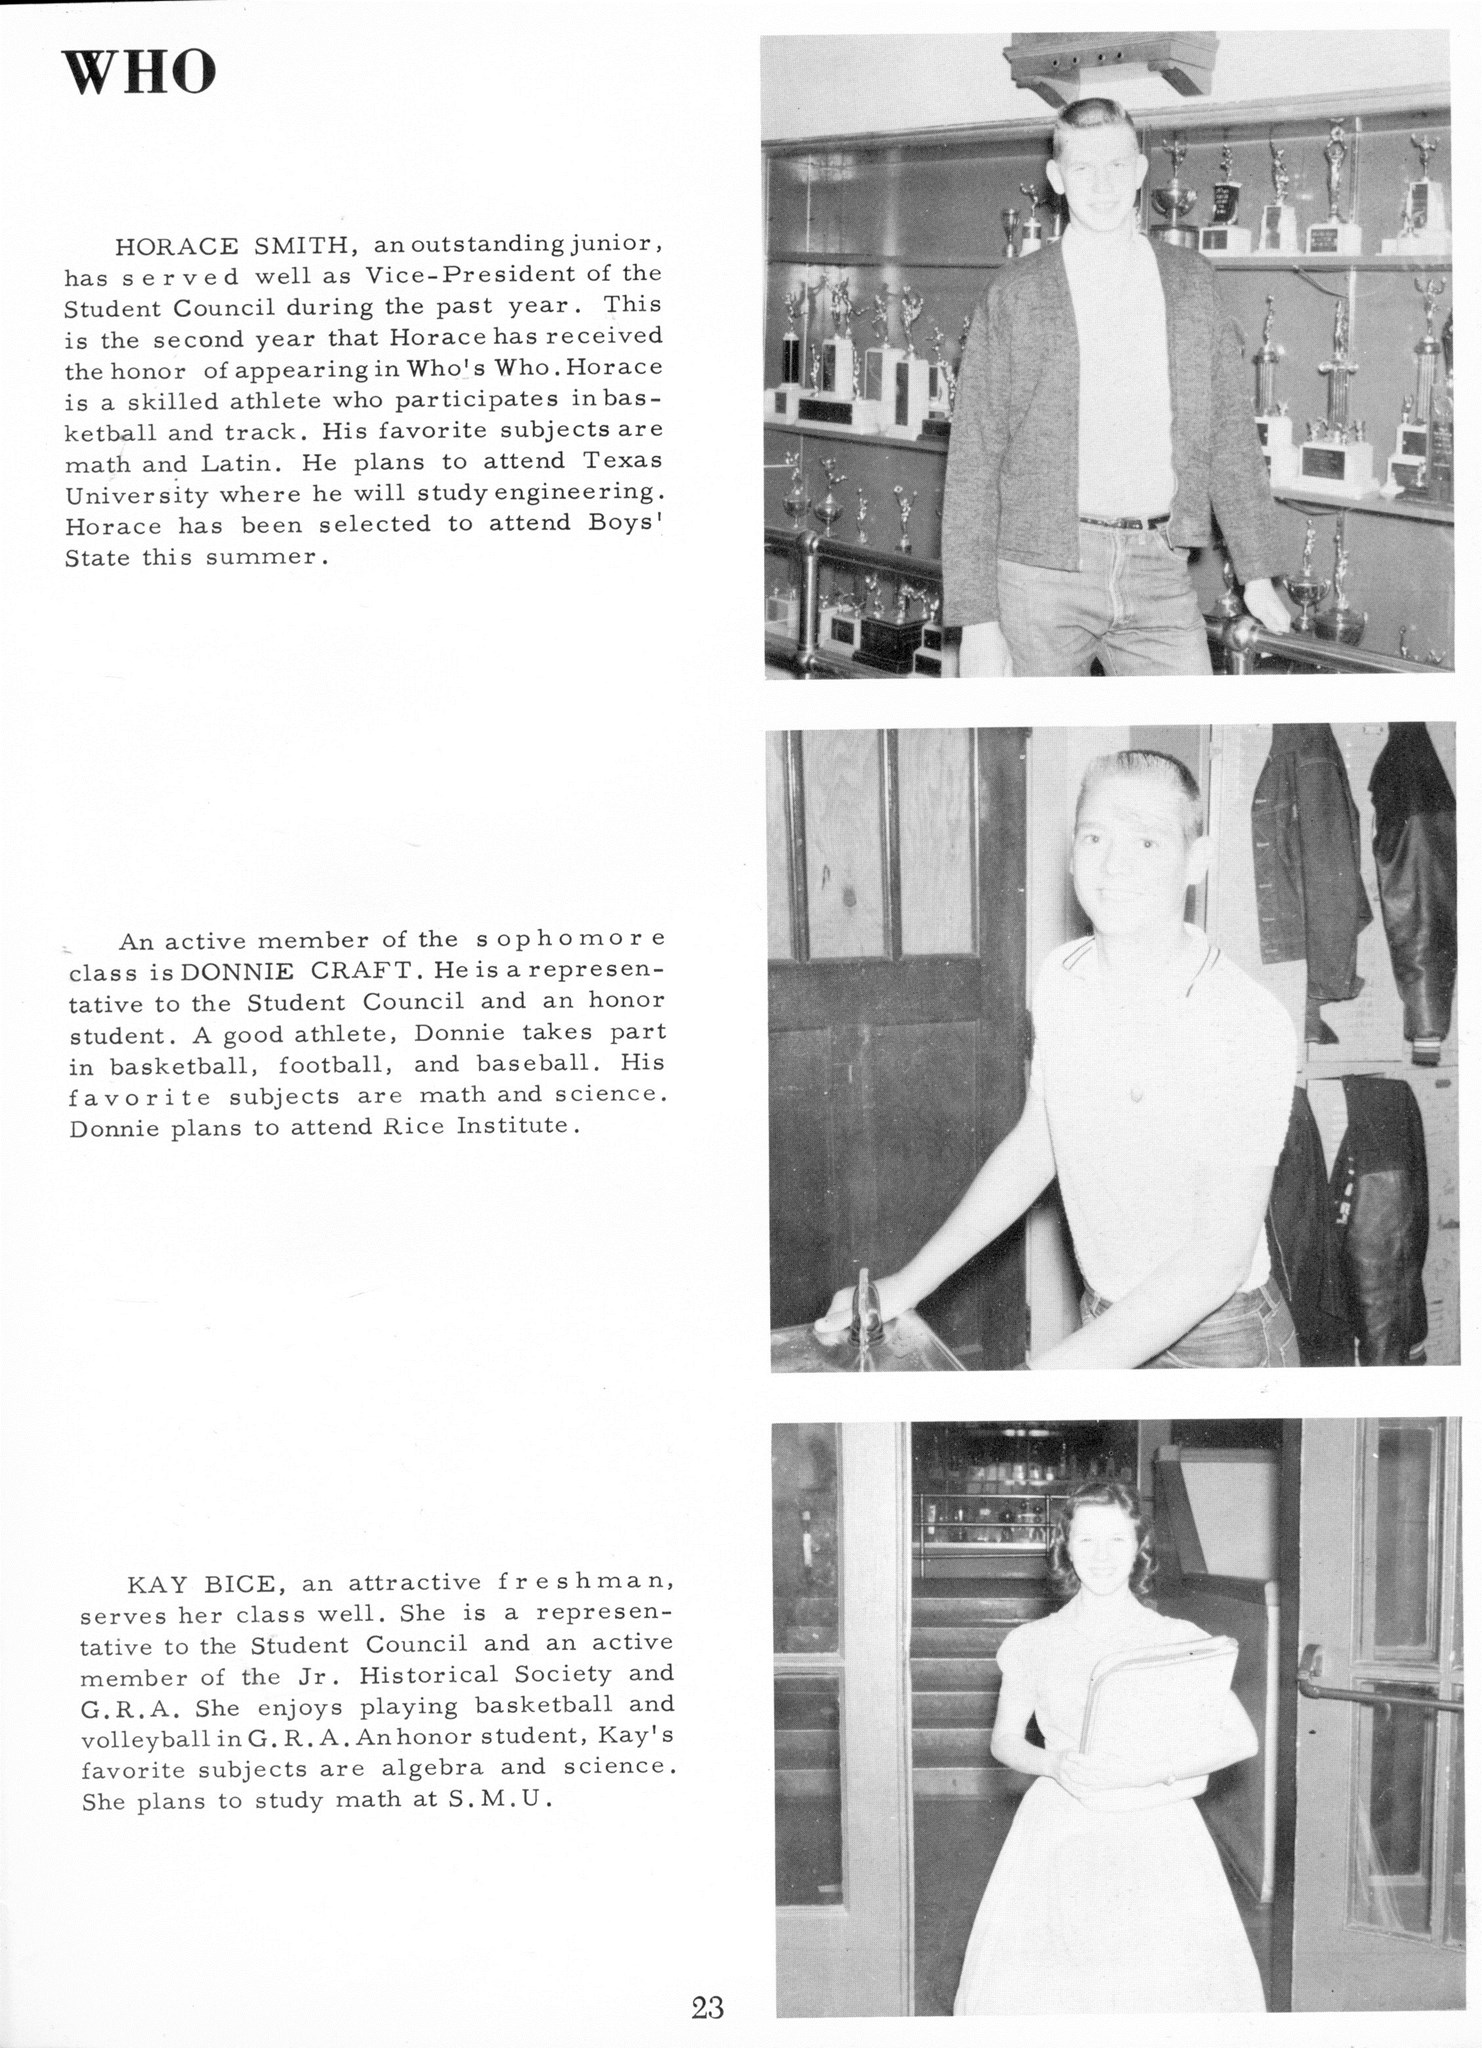 ../../../Images/Large/1959/Arclight-1959-pg0023.jpg